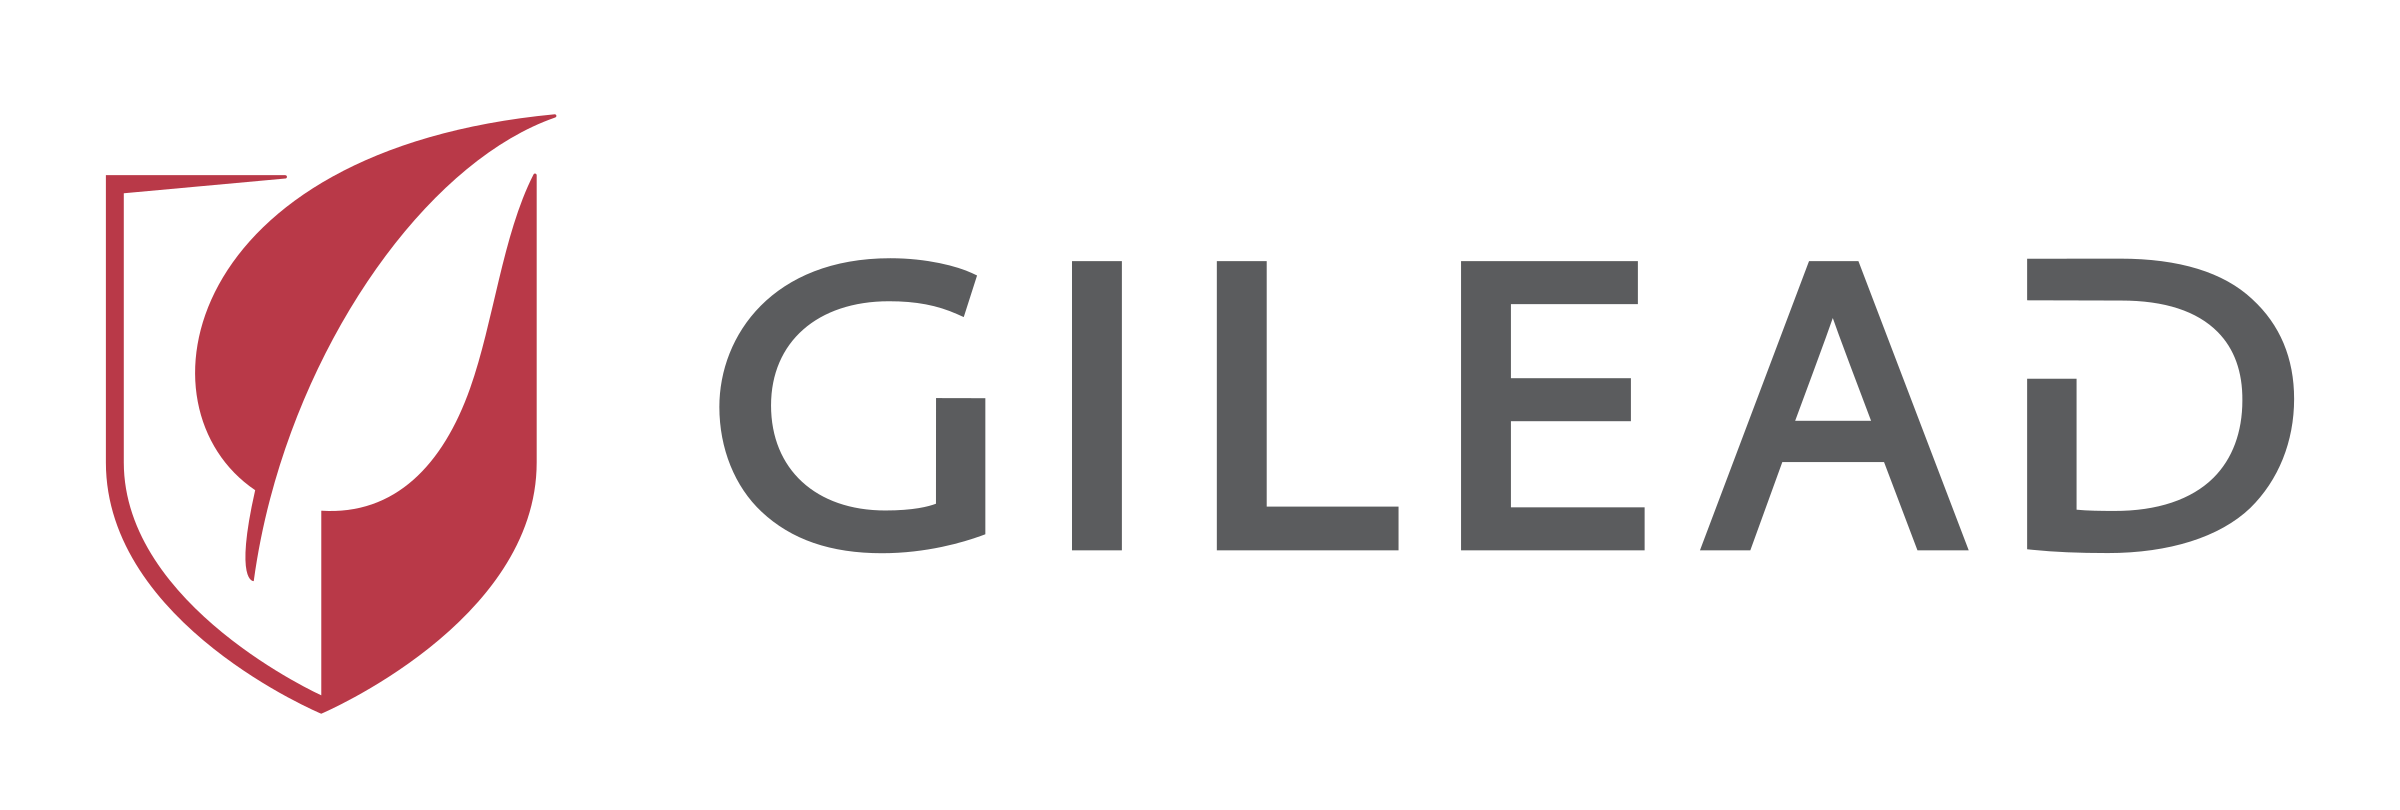 gilead-2-logo-png-transparent - from the web - cropped.png